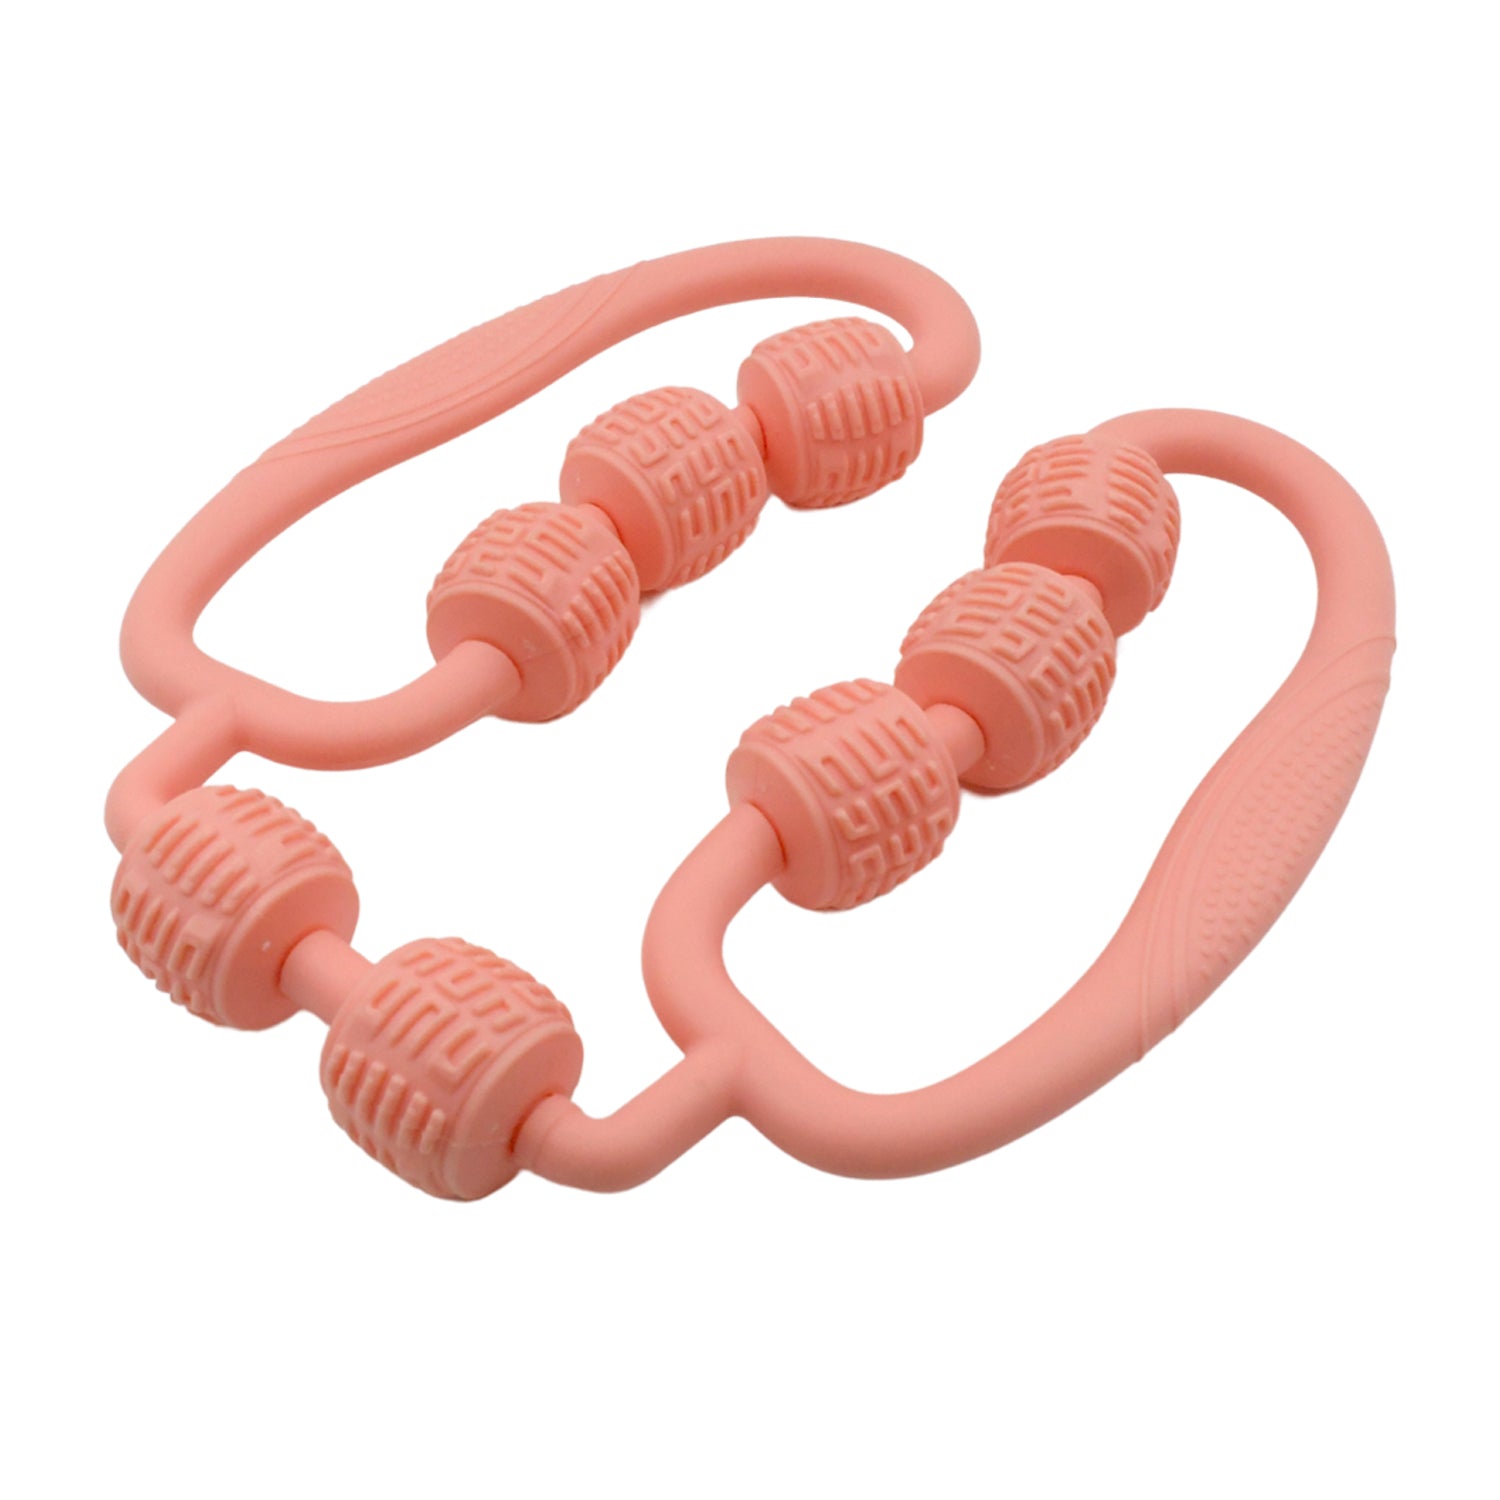 Muscle Massage Roller, 8 &10 Wheels Relieve Soreness Leg Muscle Roller Fitness Roller Muscle Relaxer Massage Roller Ring Clip All Round Massaging Uniform Force Elastic PP Drop Shaped for Home Use (1 Pc)